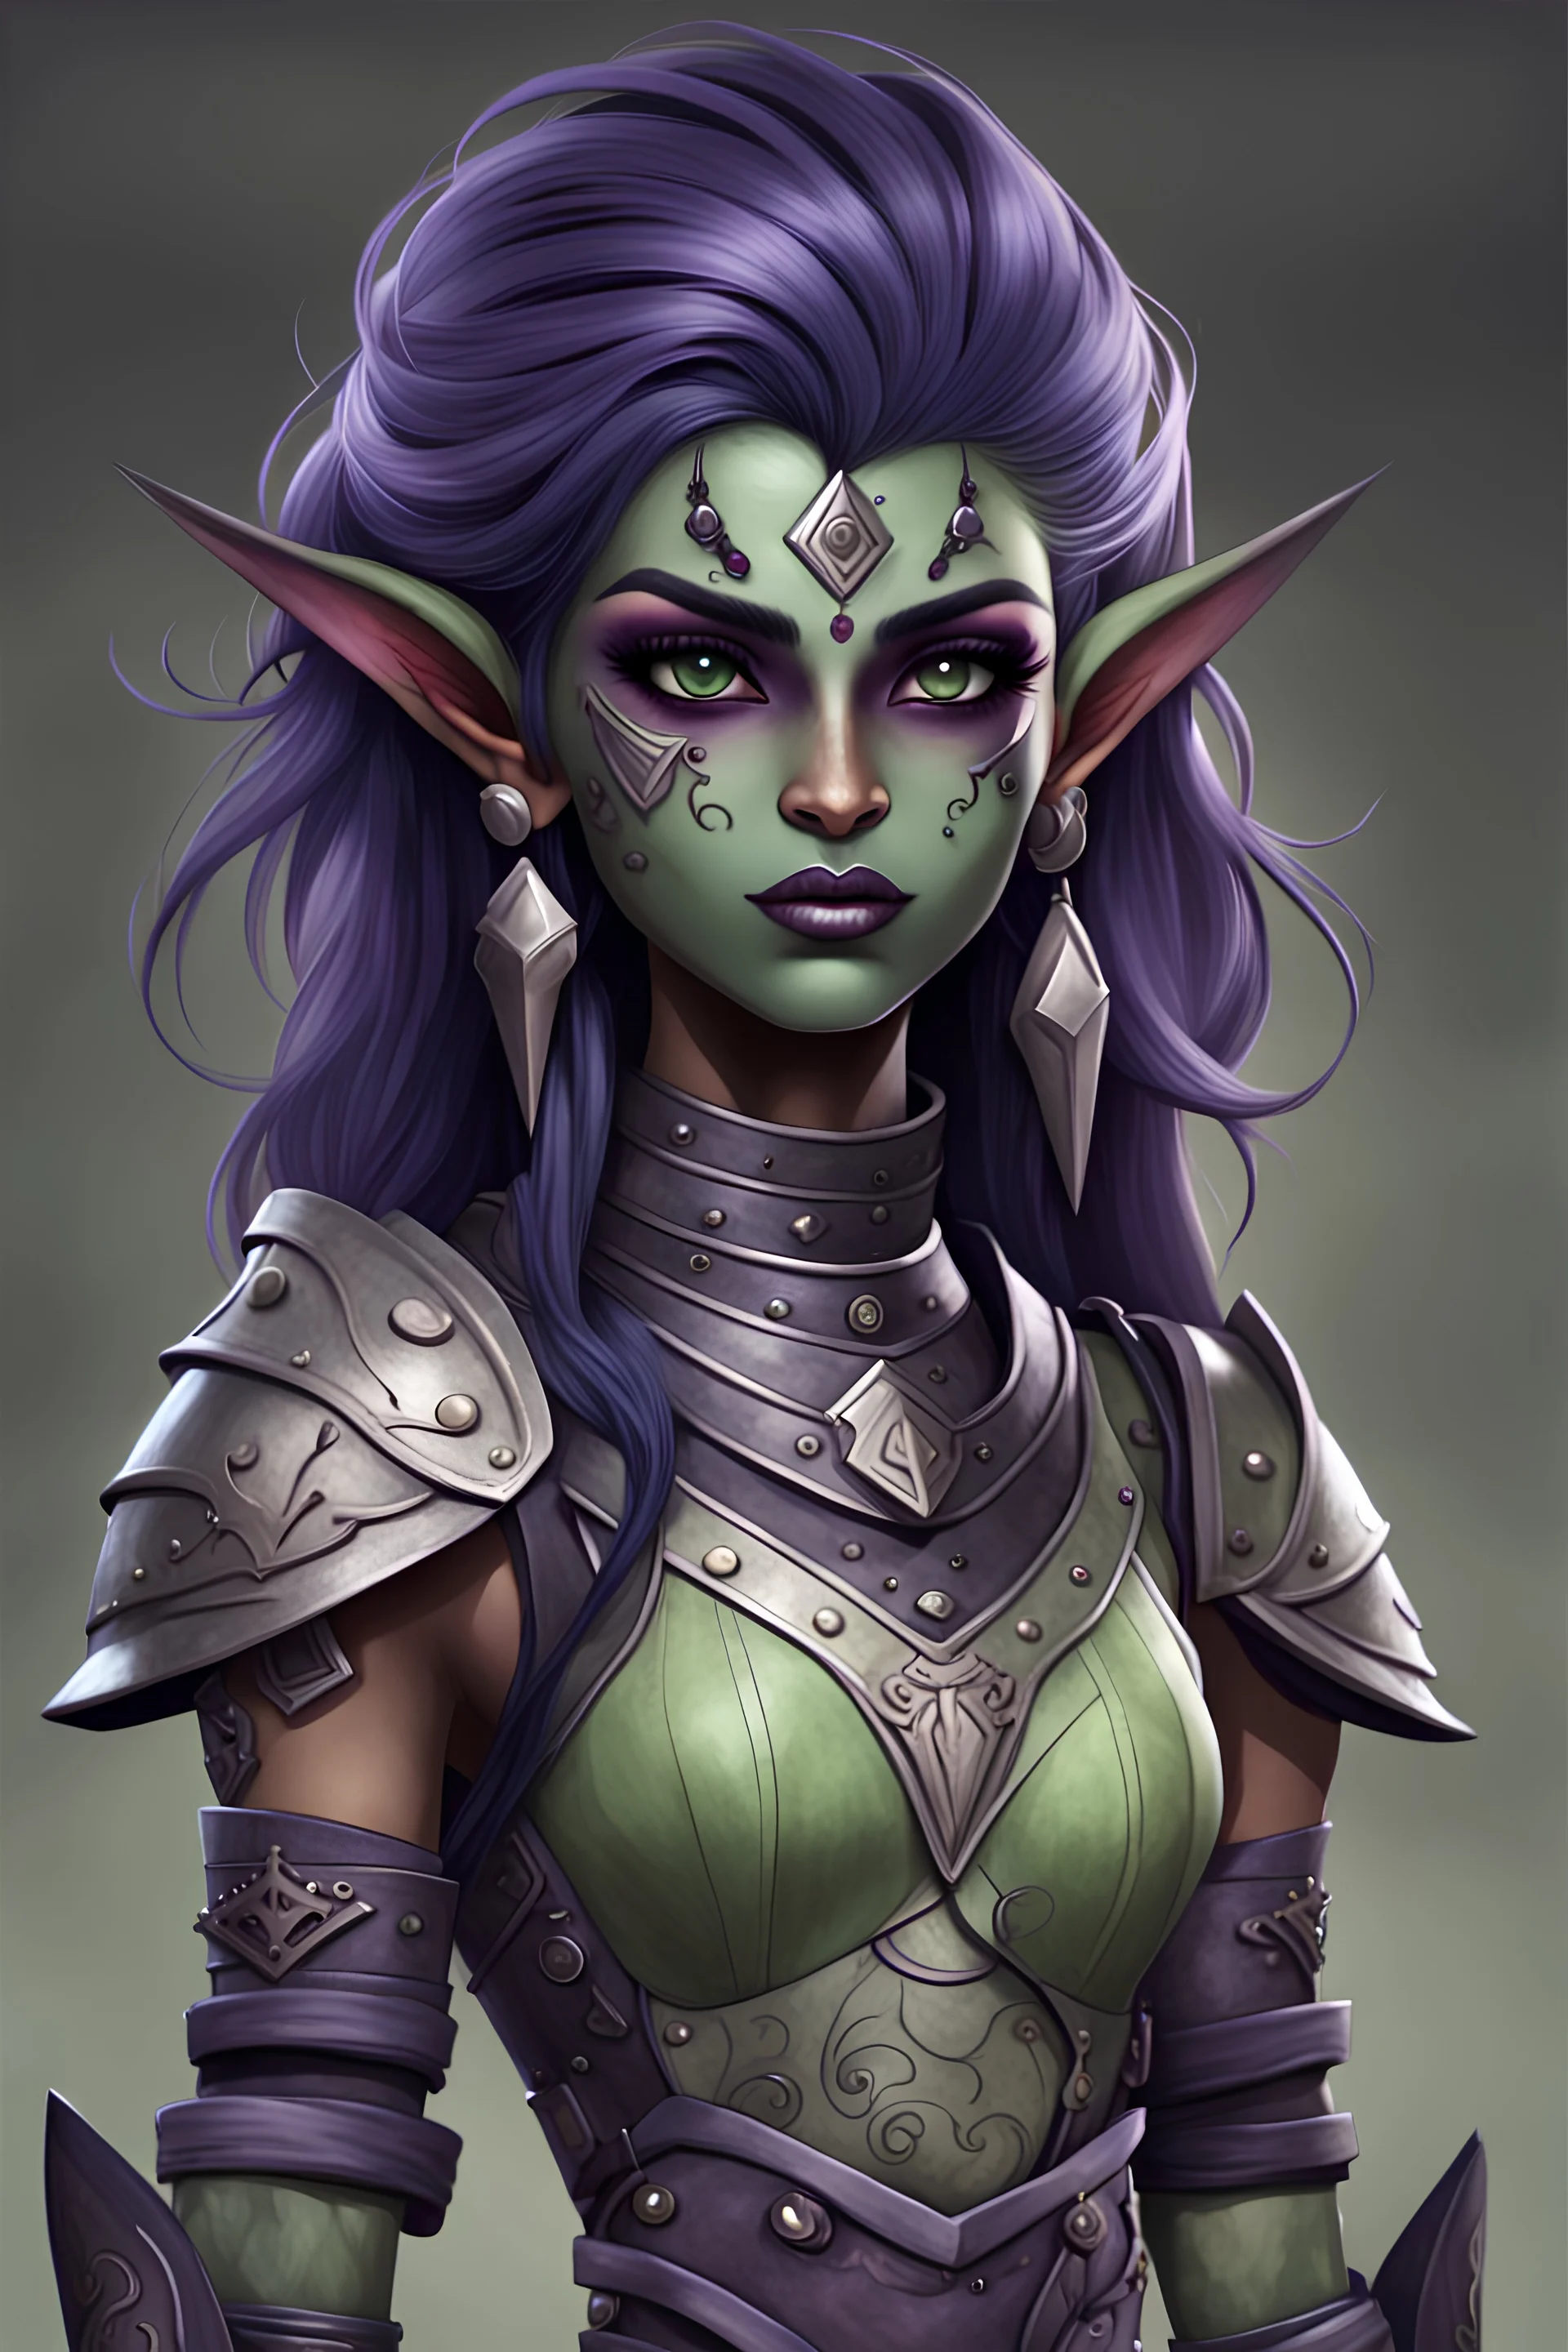 Create a young, perky, female humanoid githyanki. She has pale green skin, big dark purple flowing hair, large dark black eyes, a few facial tatoos, face, pointed ears, dressed in armor.